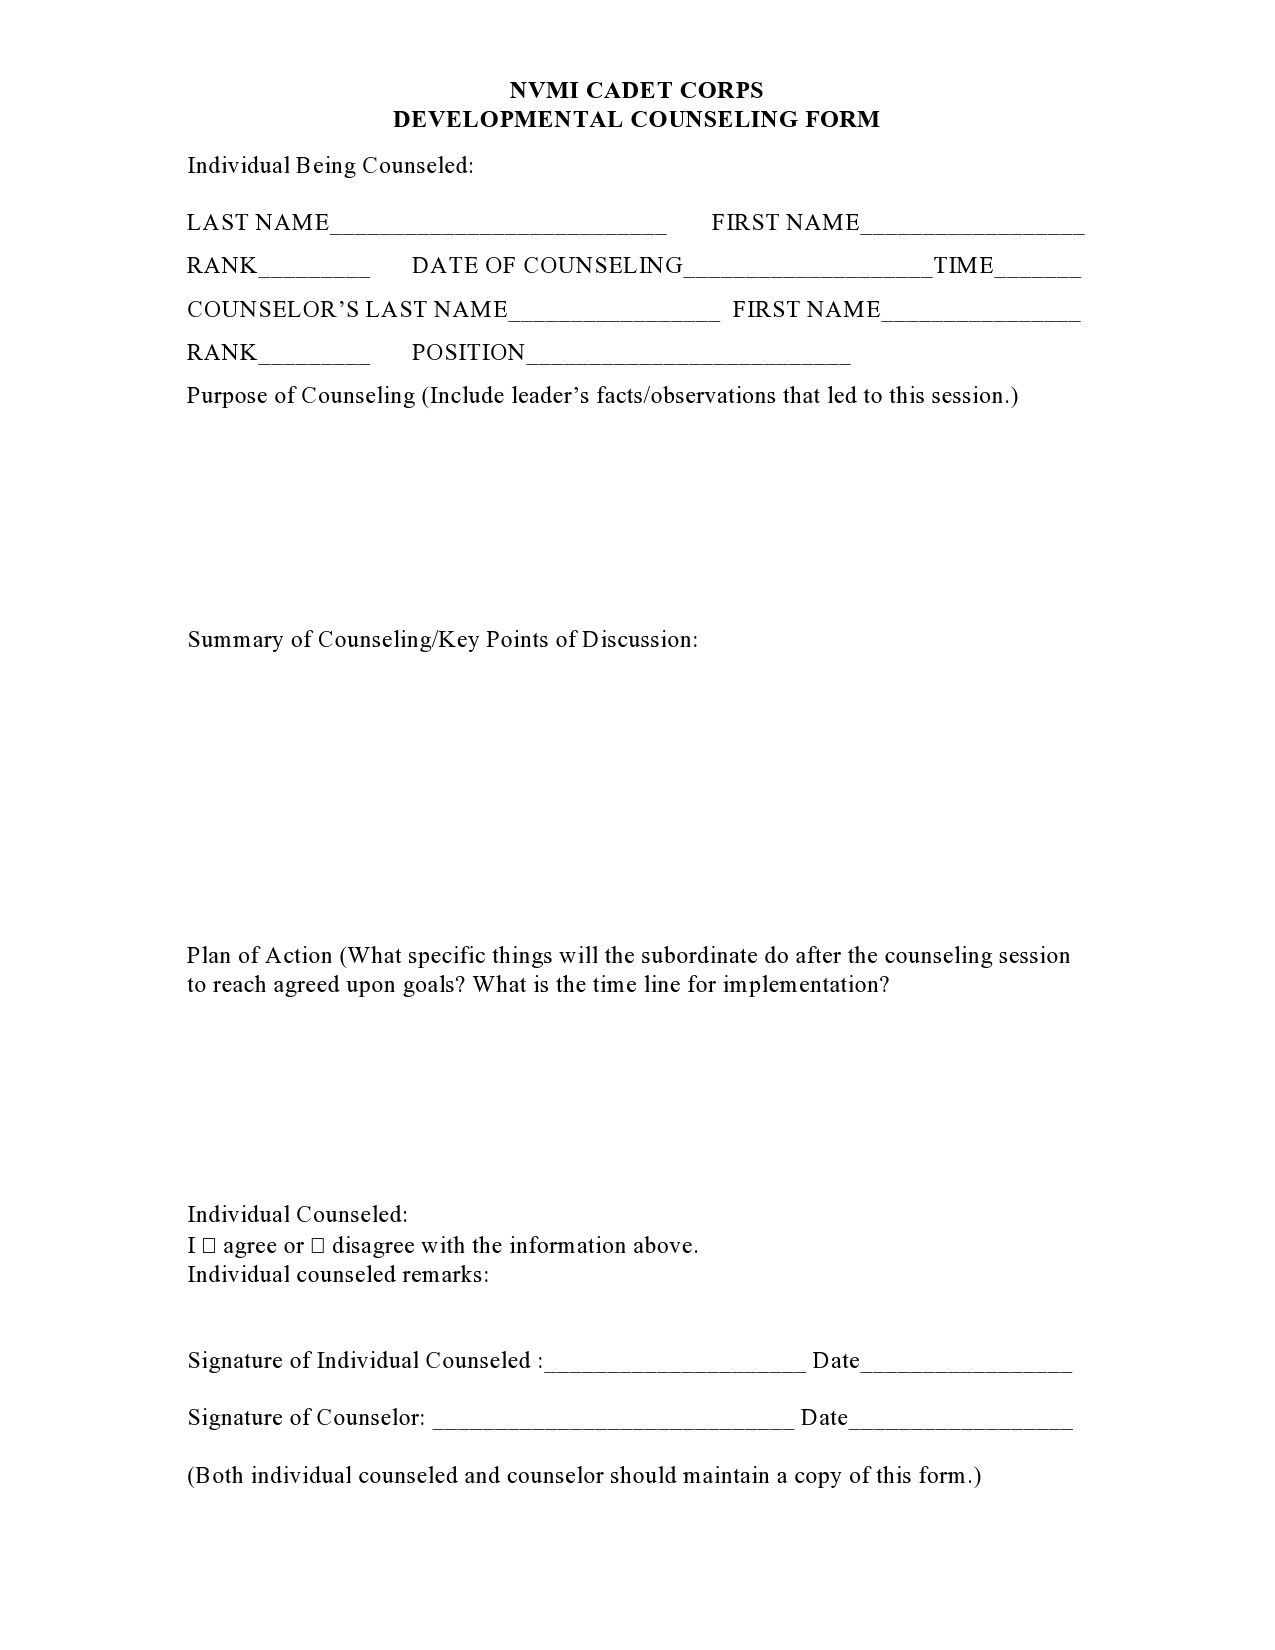 Free army counseling form 07